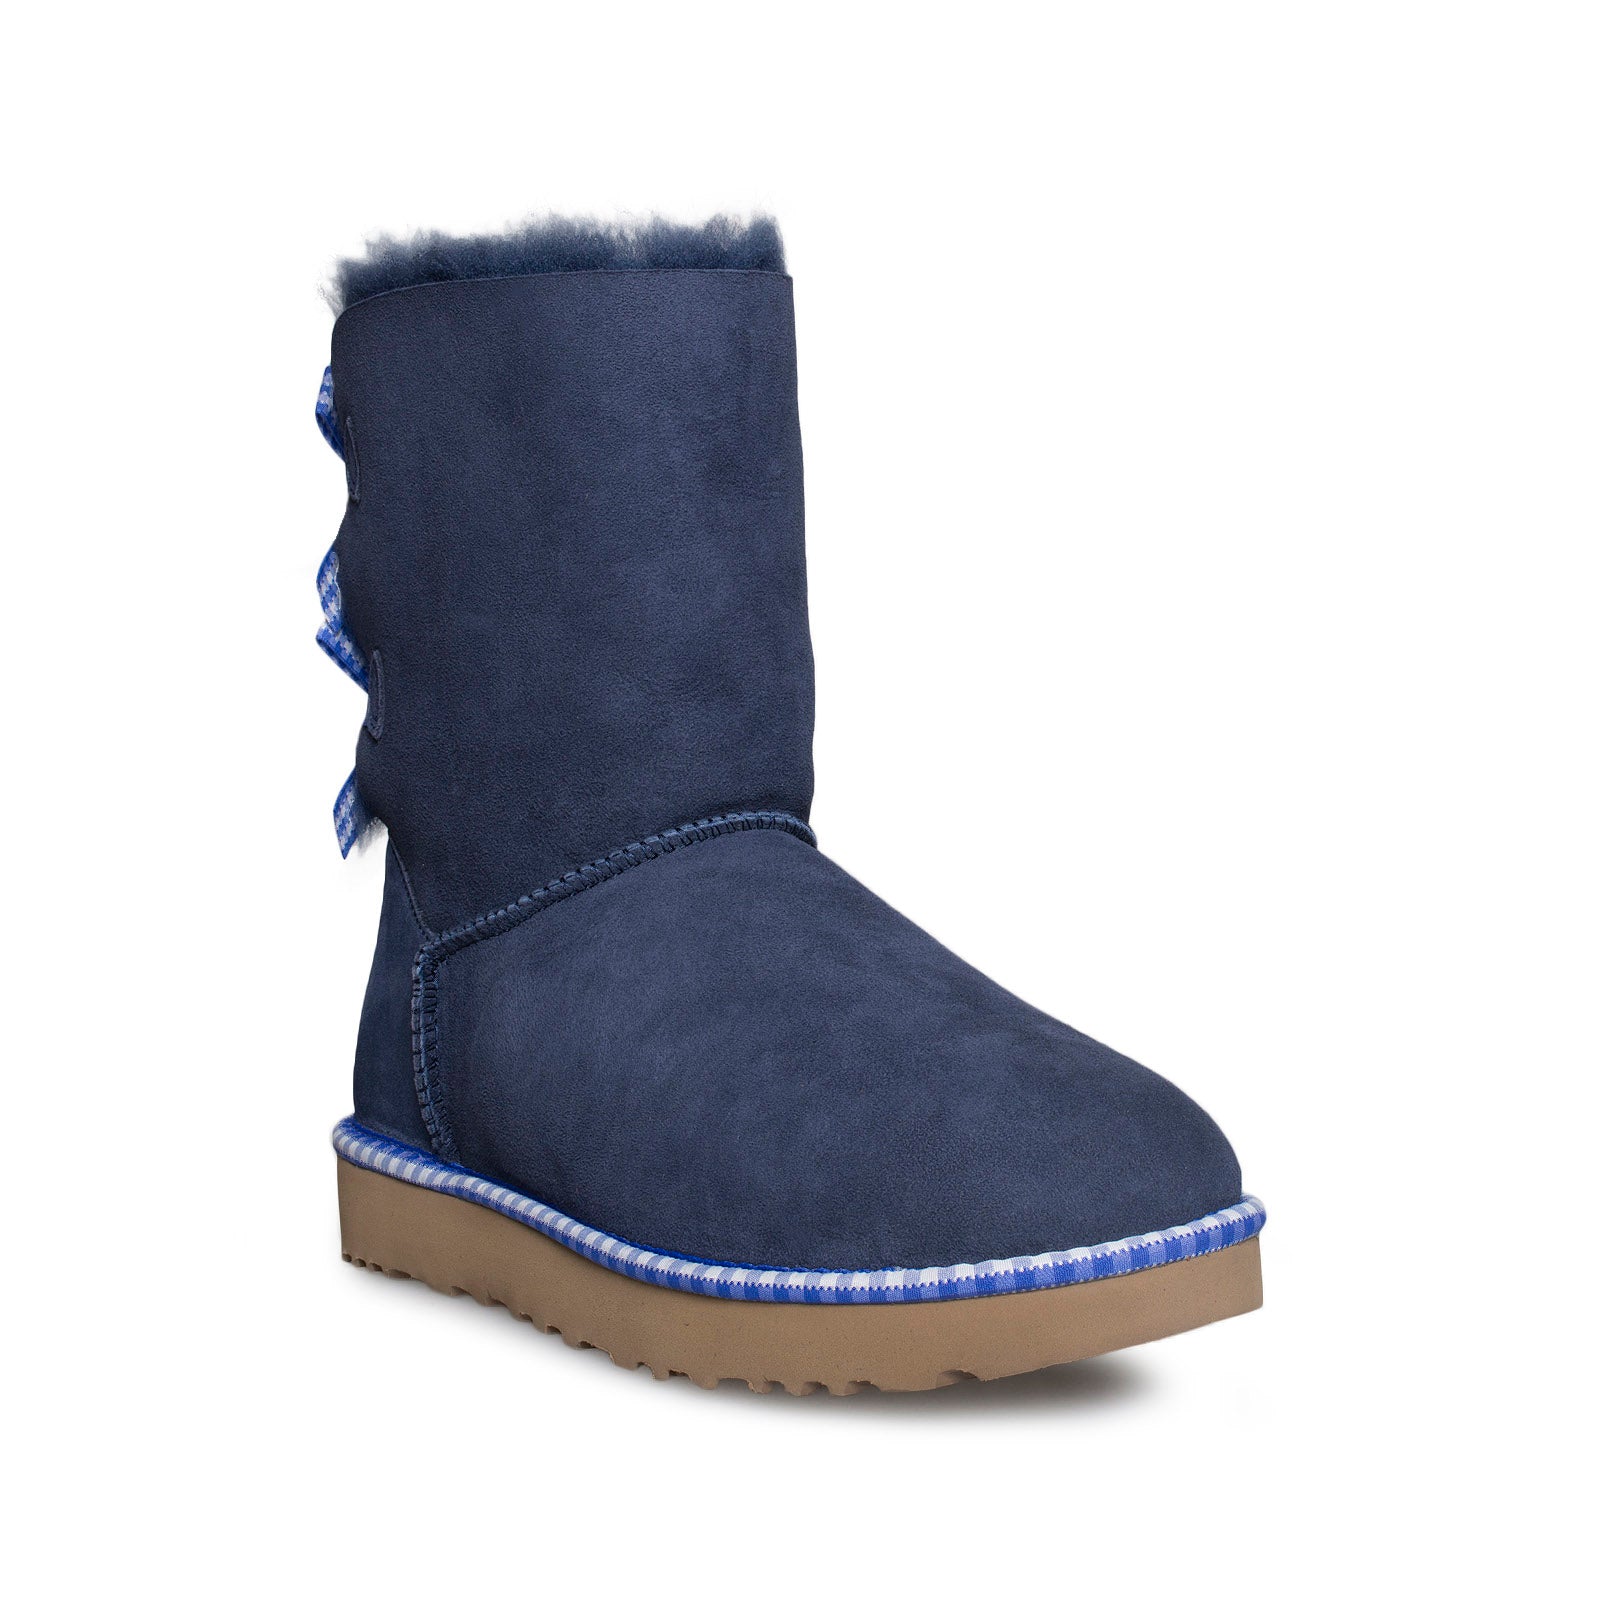 UGG Bailey Bow Gingham Navy Boots 